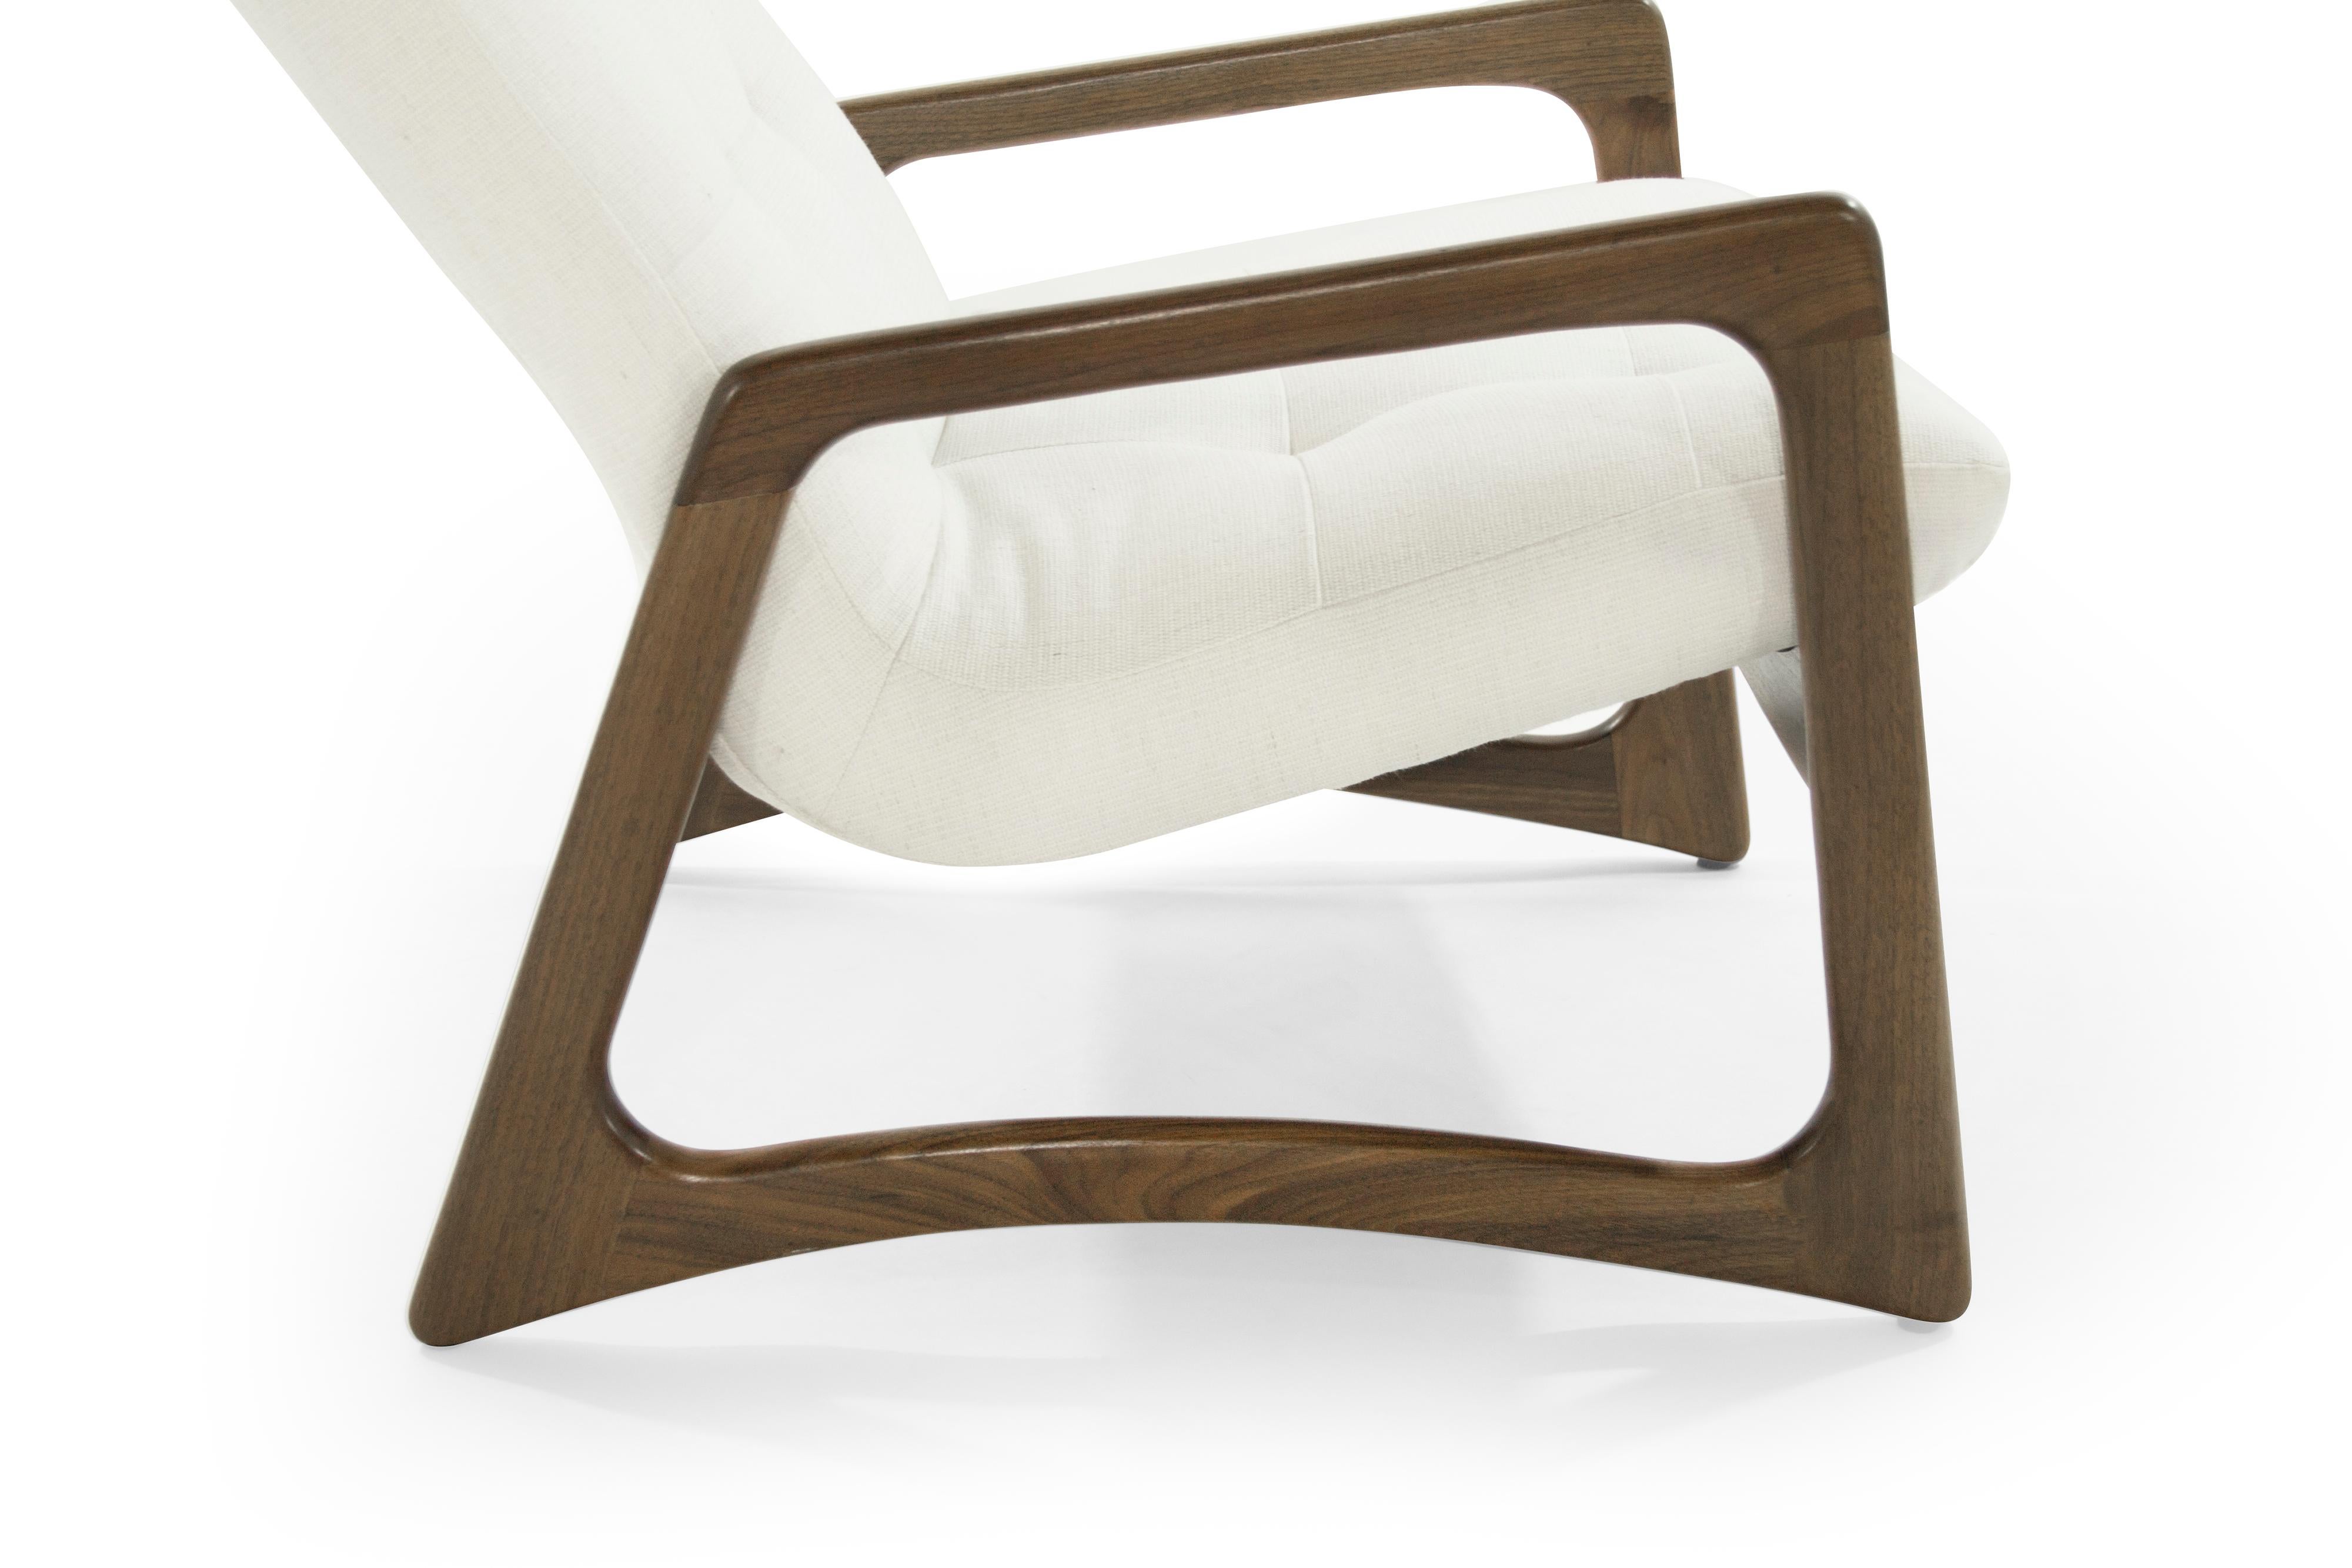 Sculptural Walnut Lounge Chairs by Adrian Pearsall for Craft Associates 1